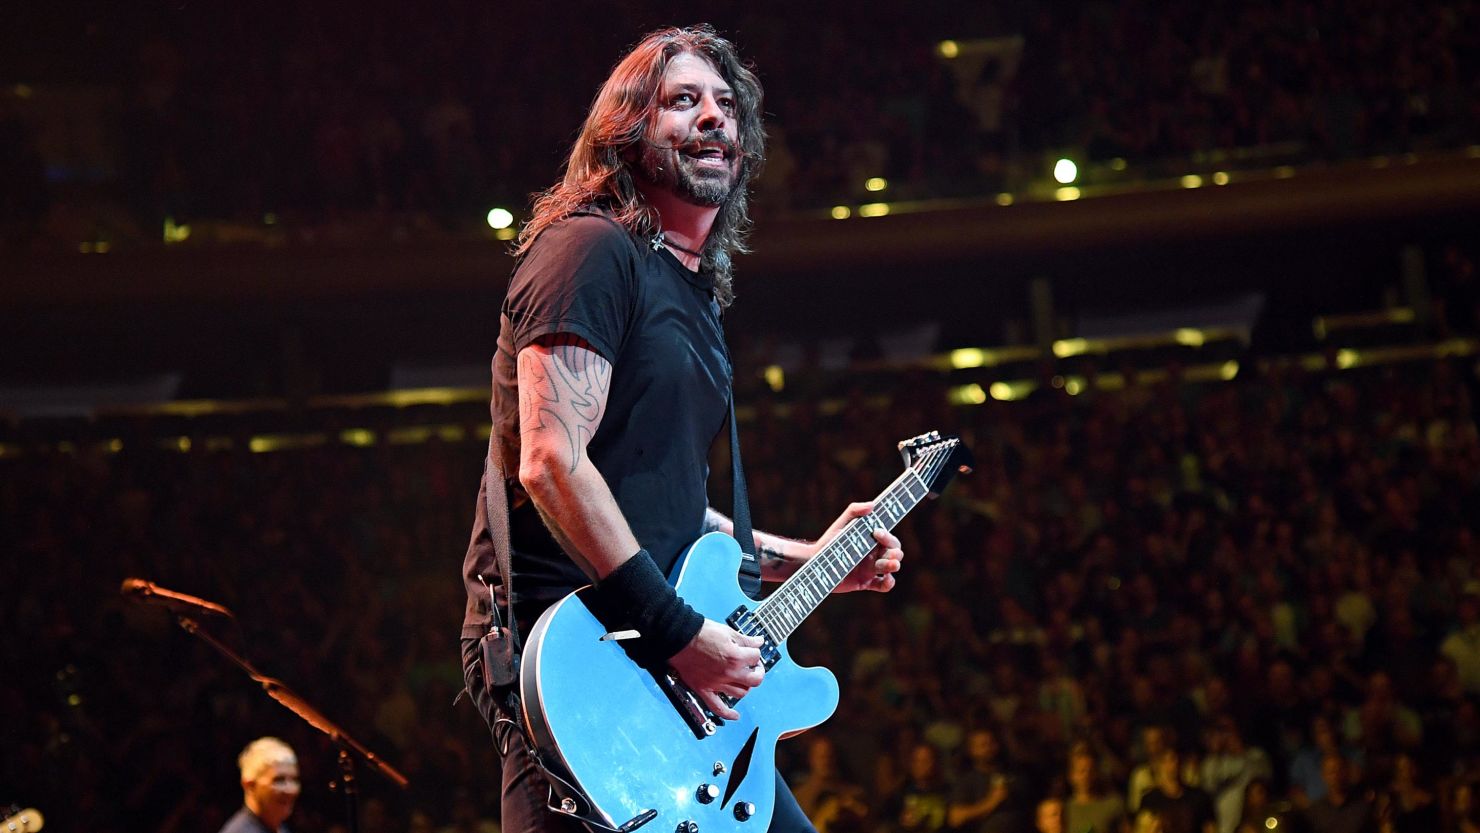 Dave Grohl performs onstage as The Foo Fighters reopen Madison Square Garden on Sunday.